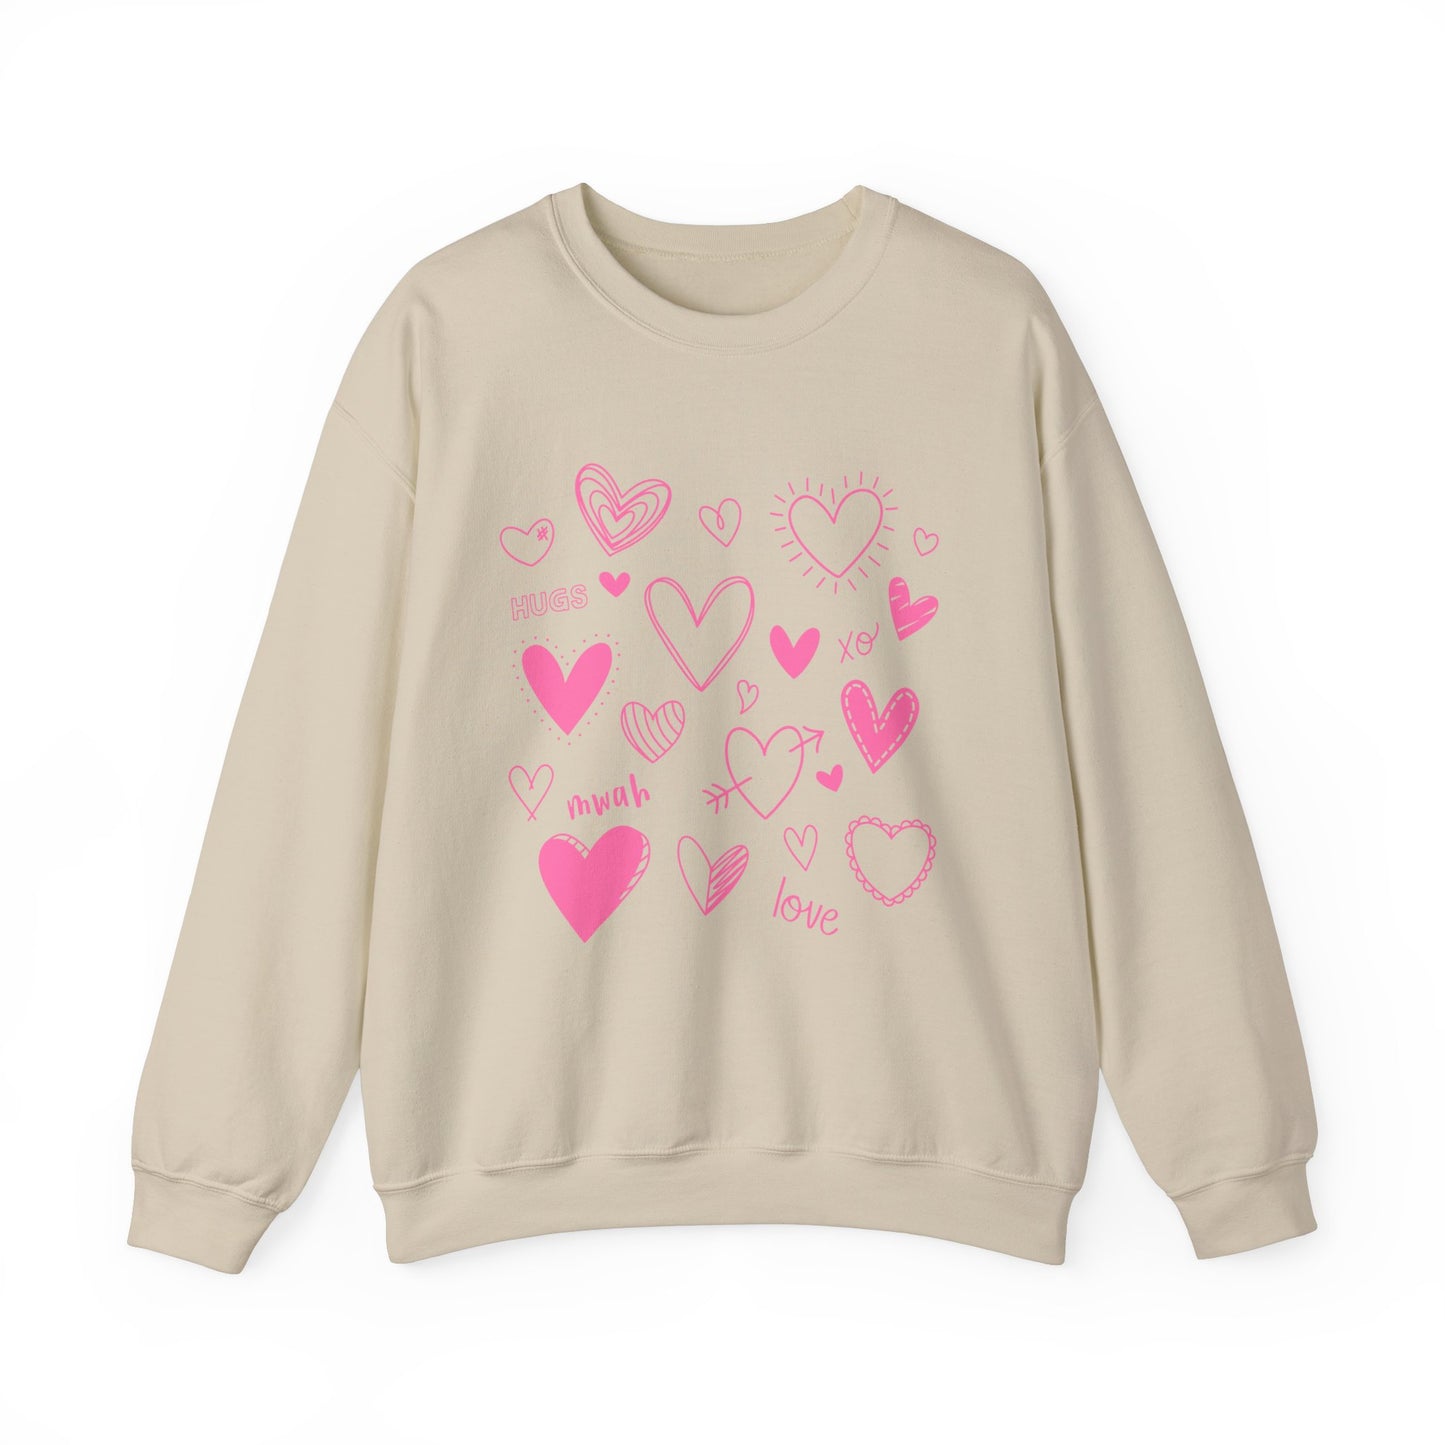 Love Hearts Valentines Day Sweatshirt, Valentine Shirts for women and girls, Valentines Day Gifts for Mom